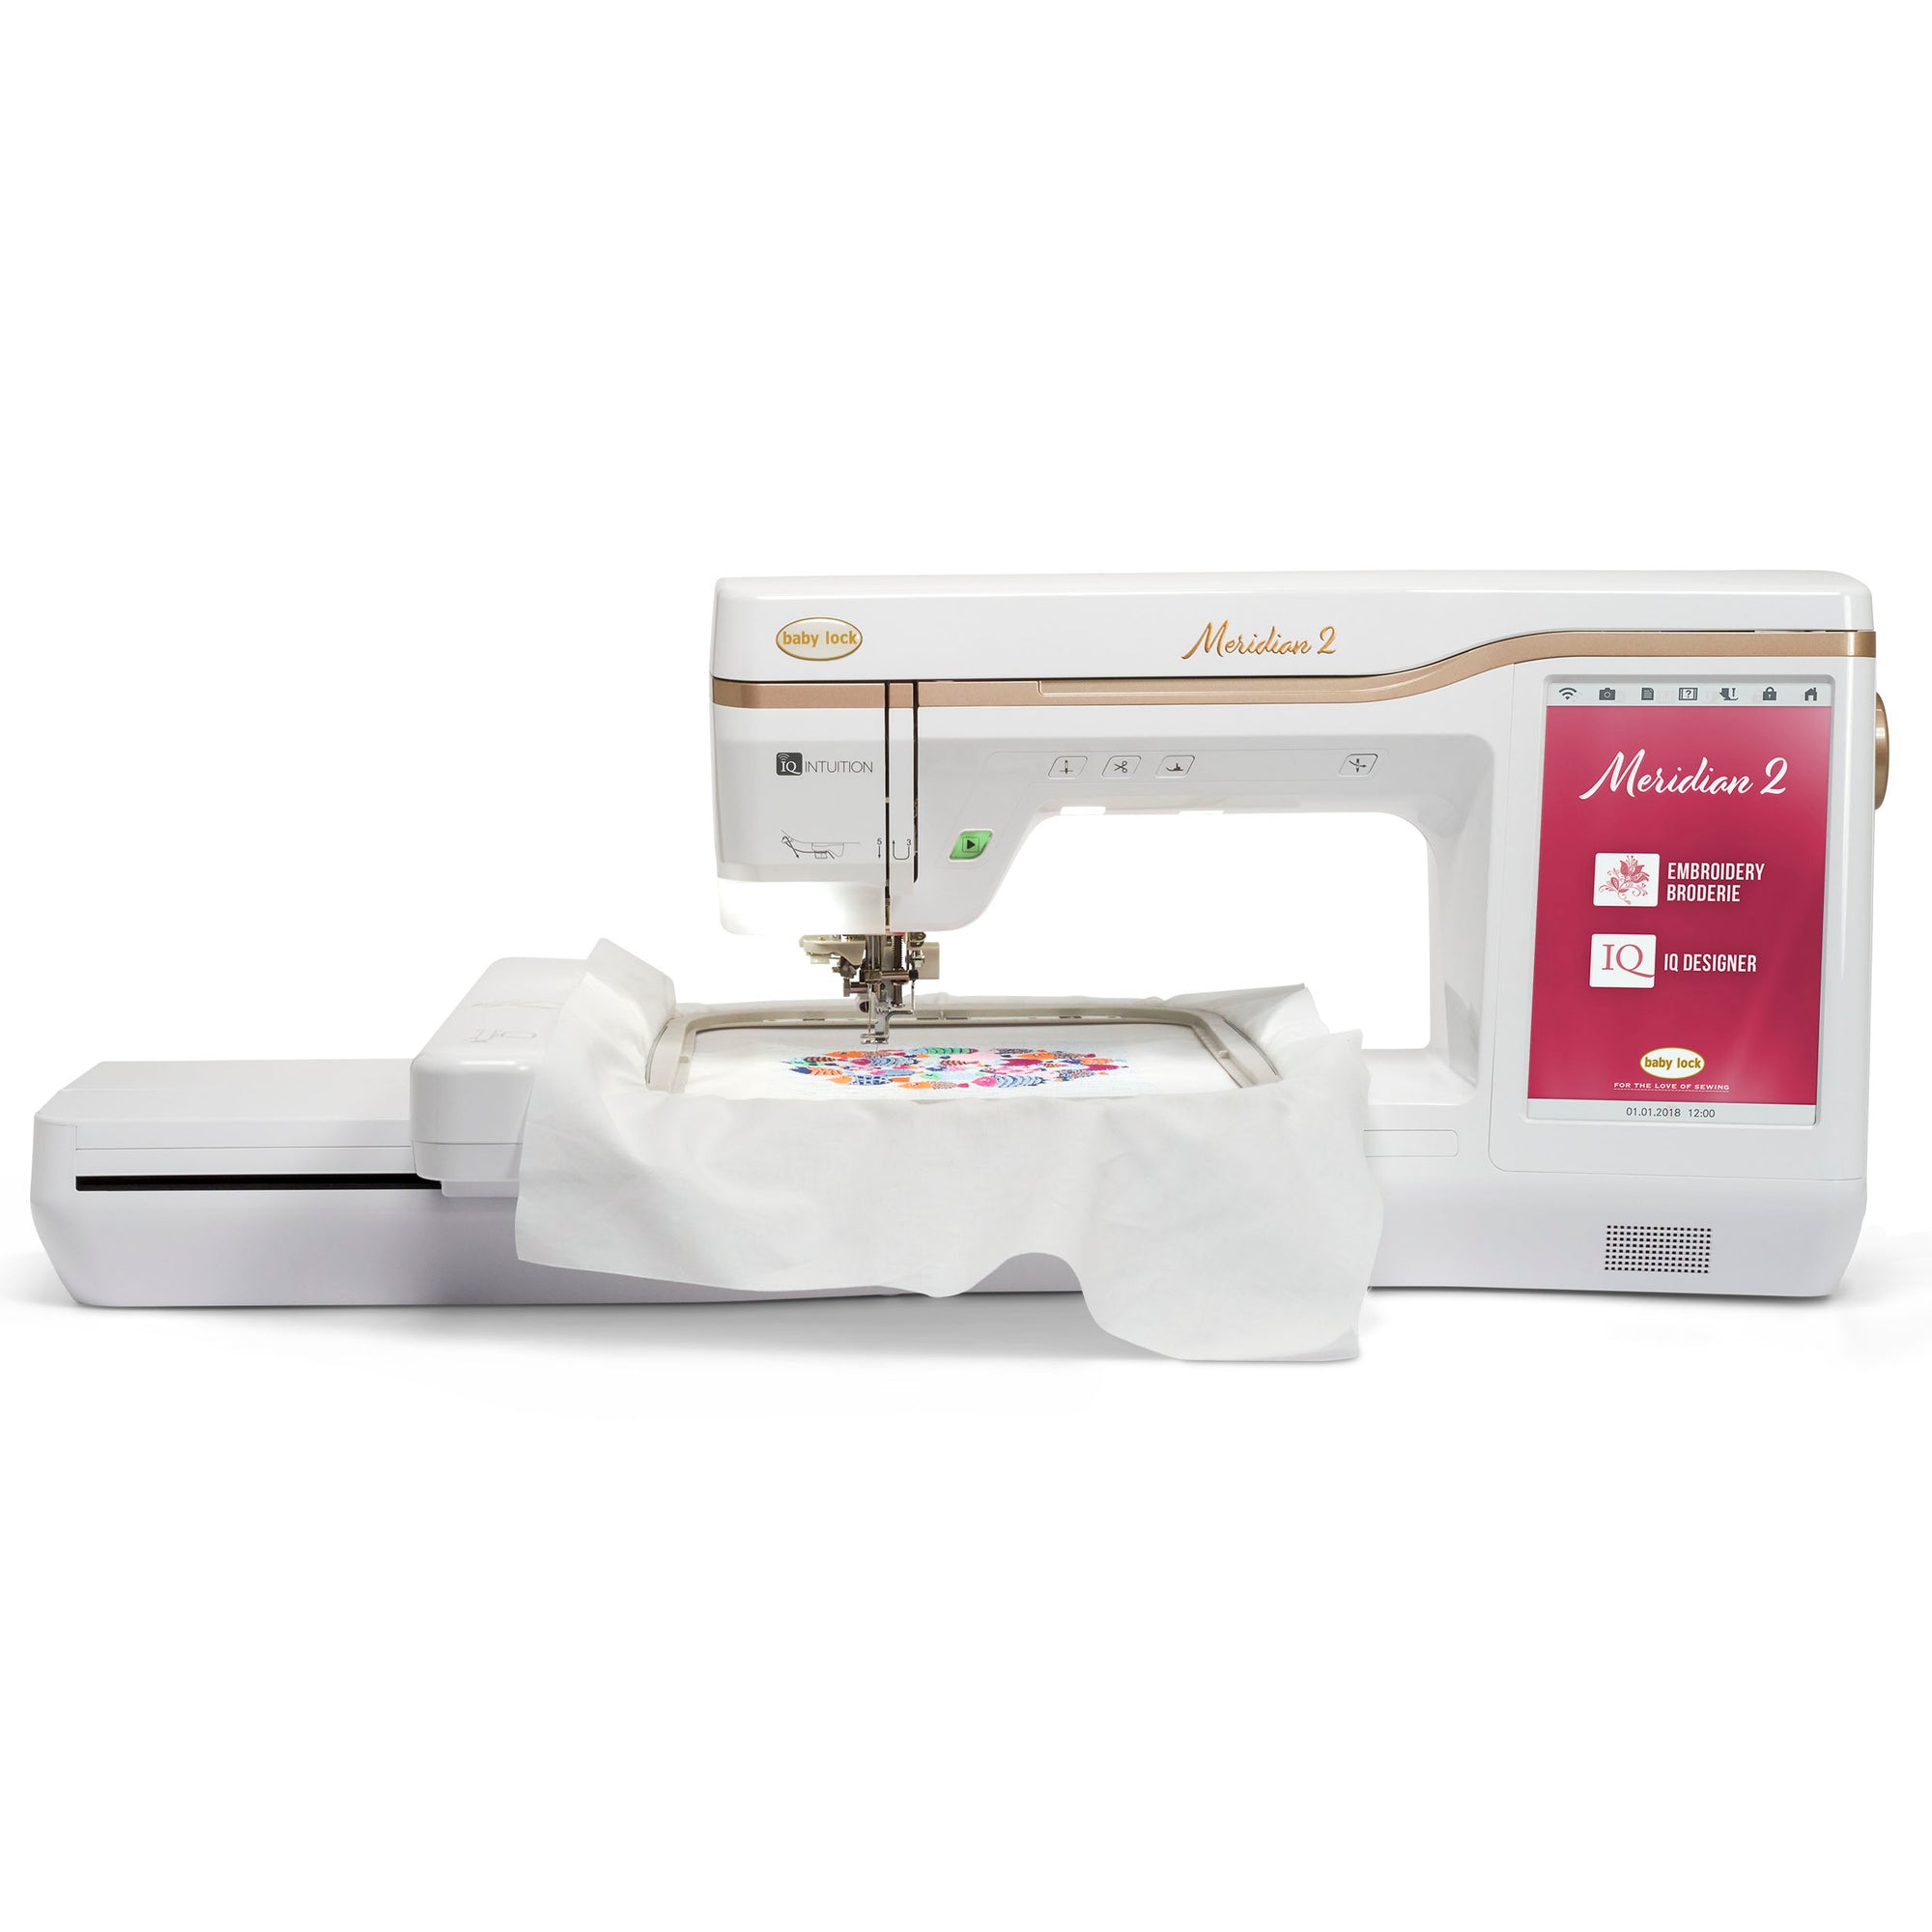 (D) Baby Lock Meridian 2 Embroidery Only Machine